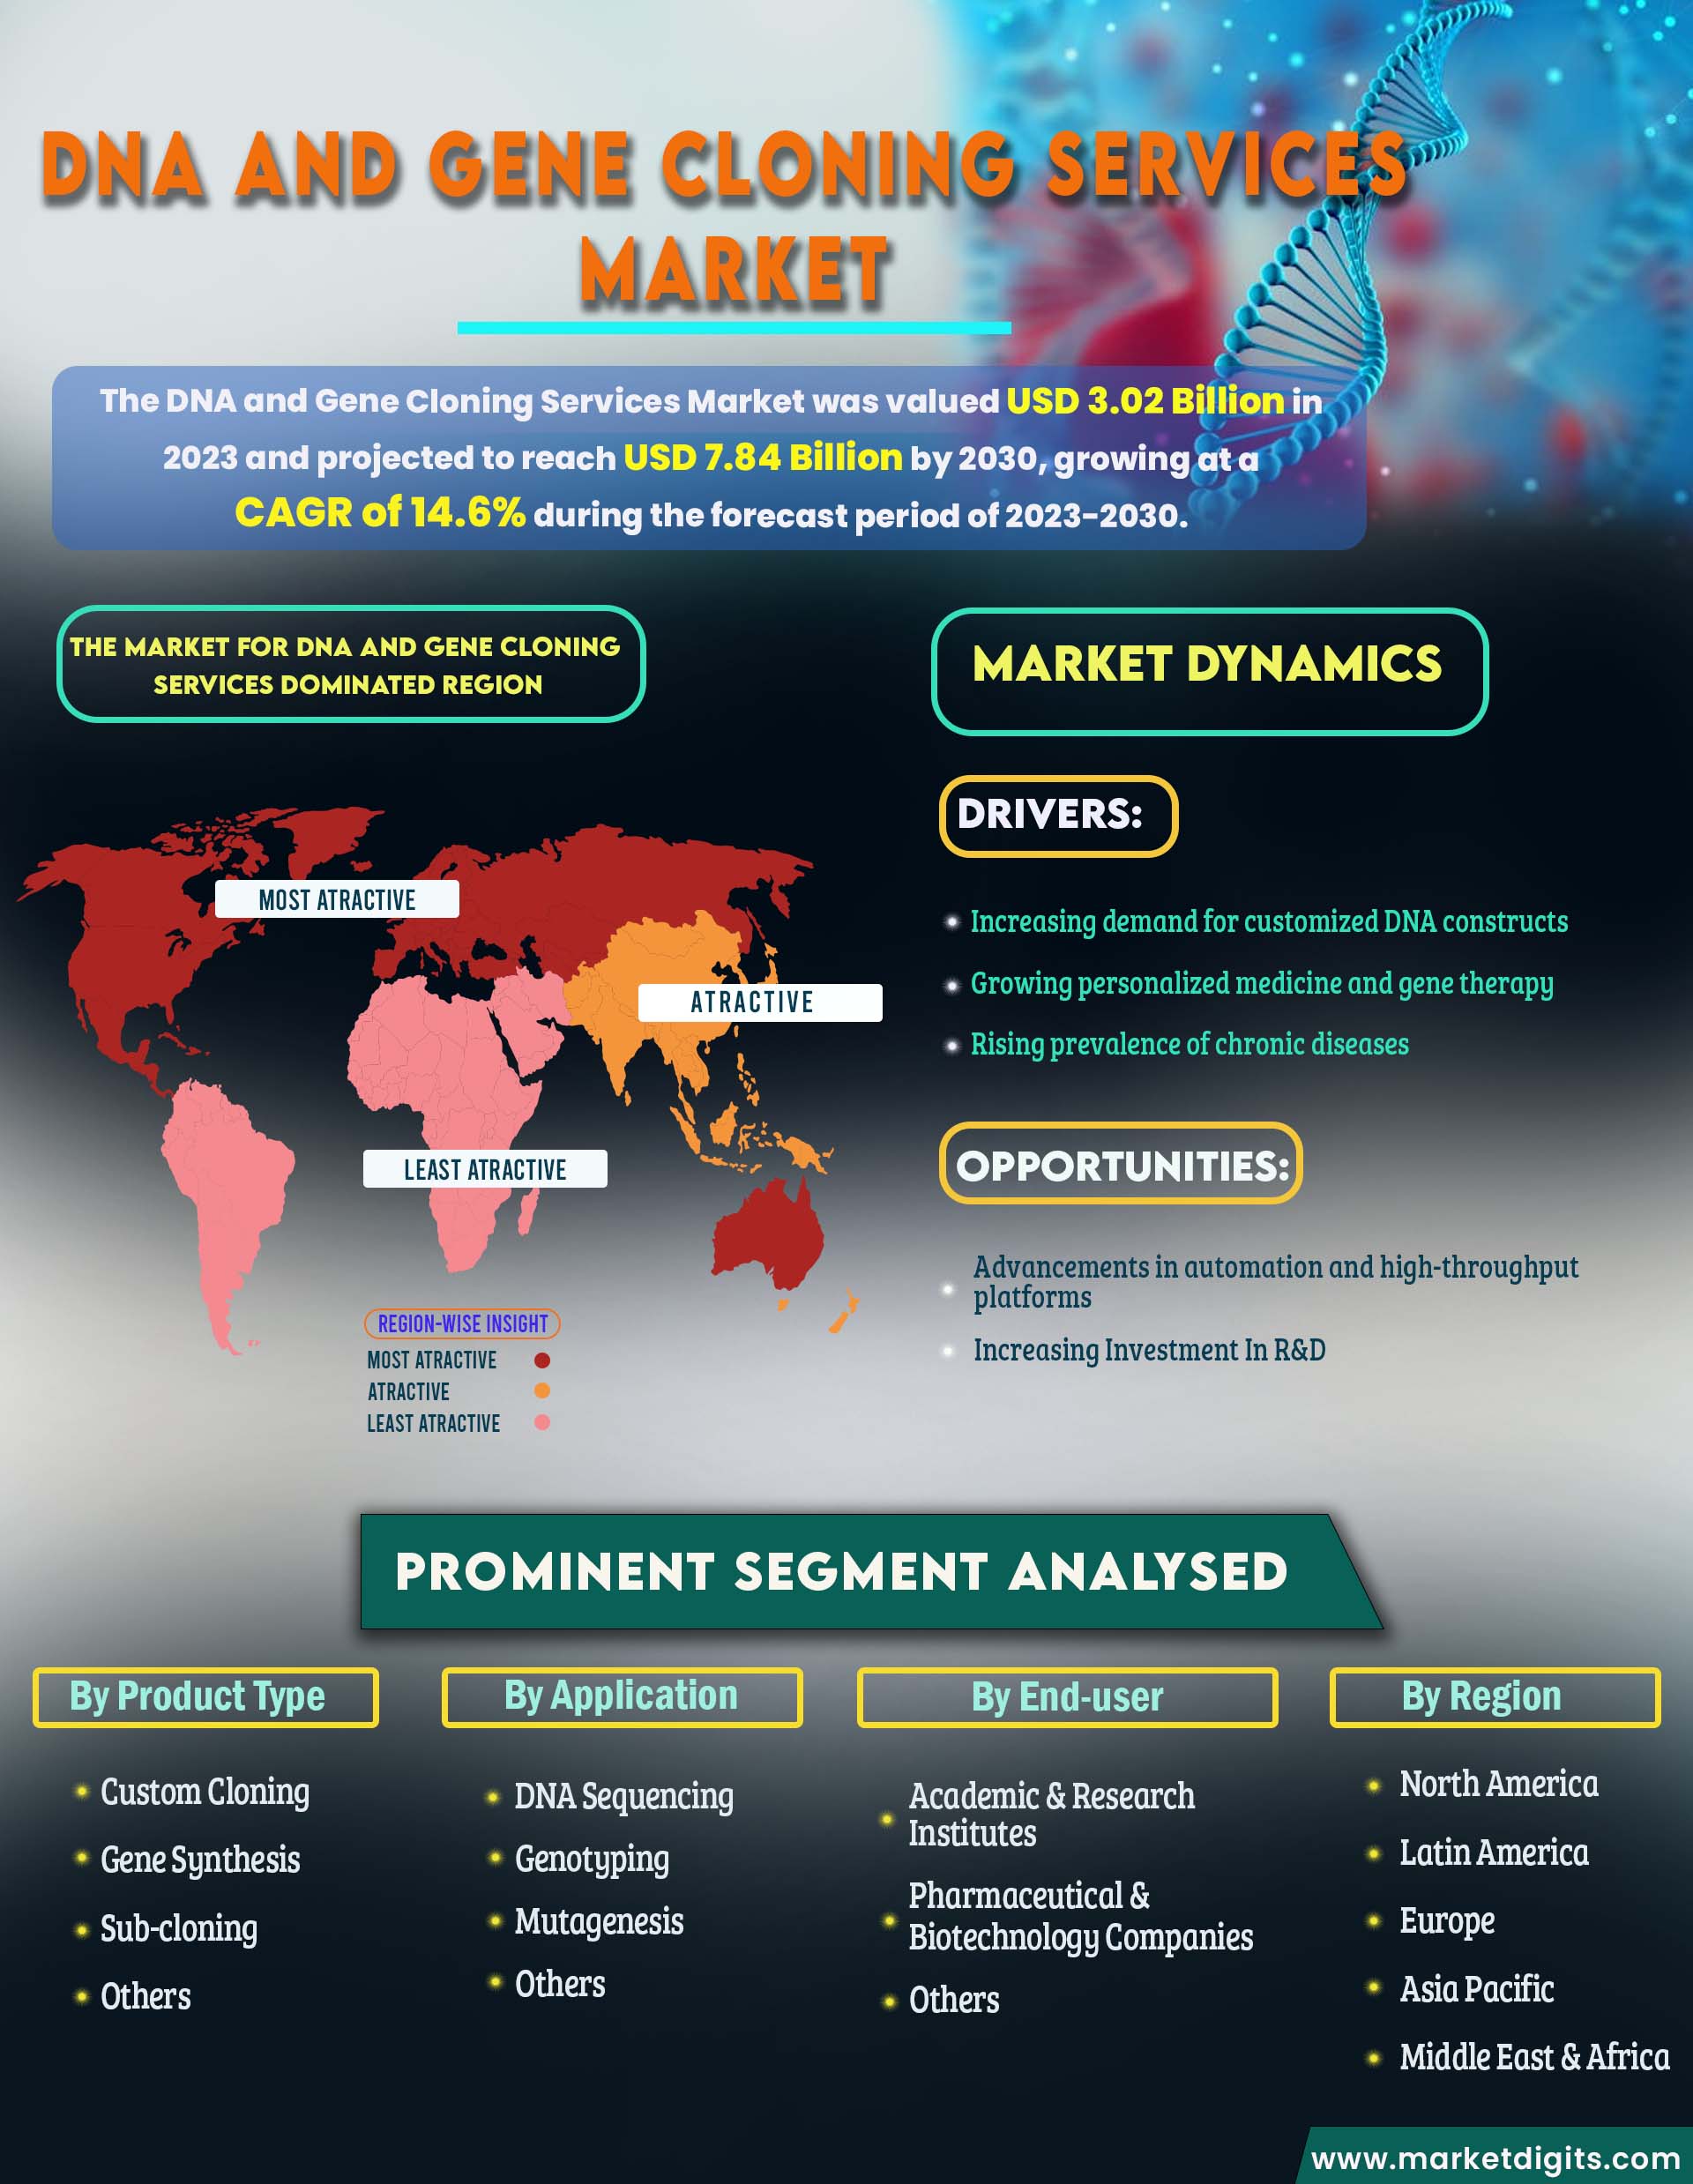 DNA and Gene Cloning Services Market